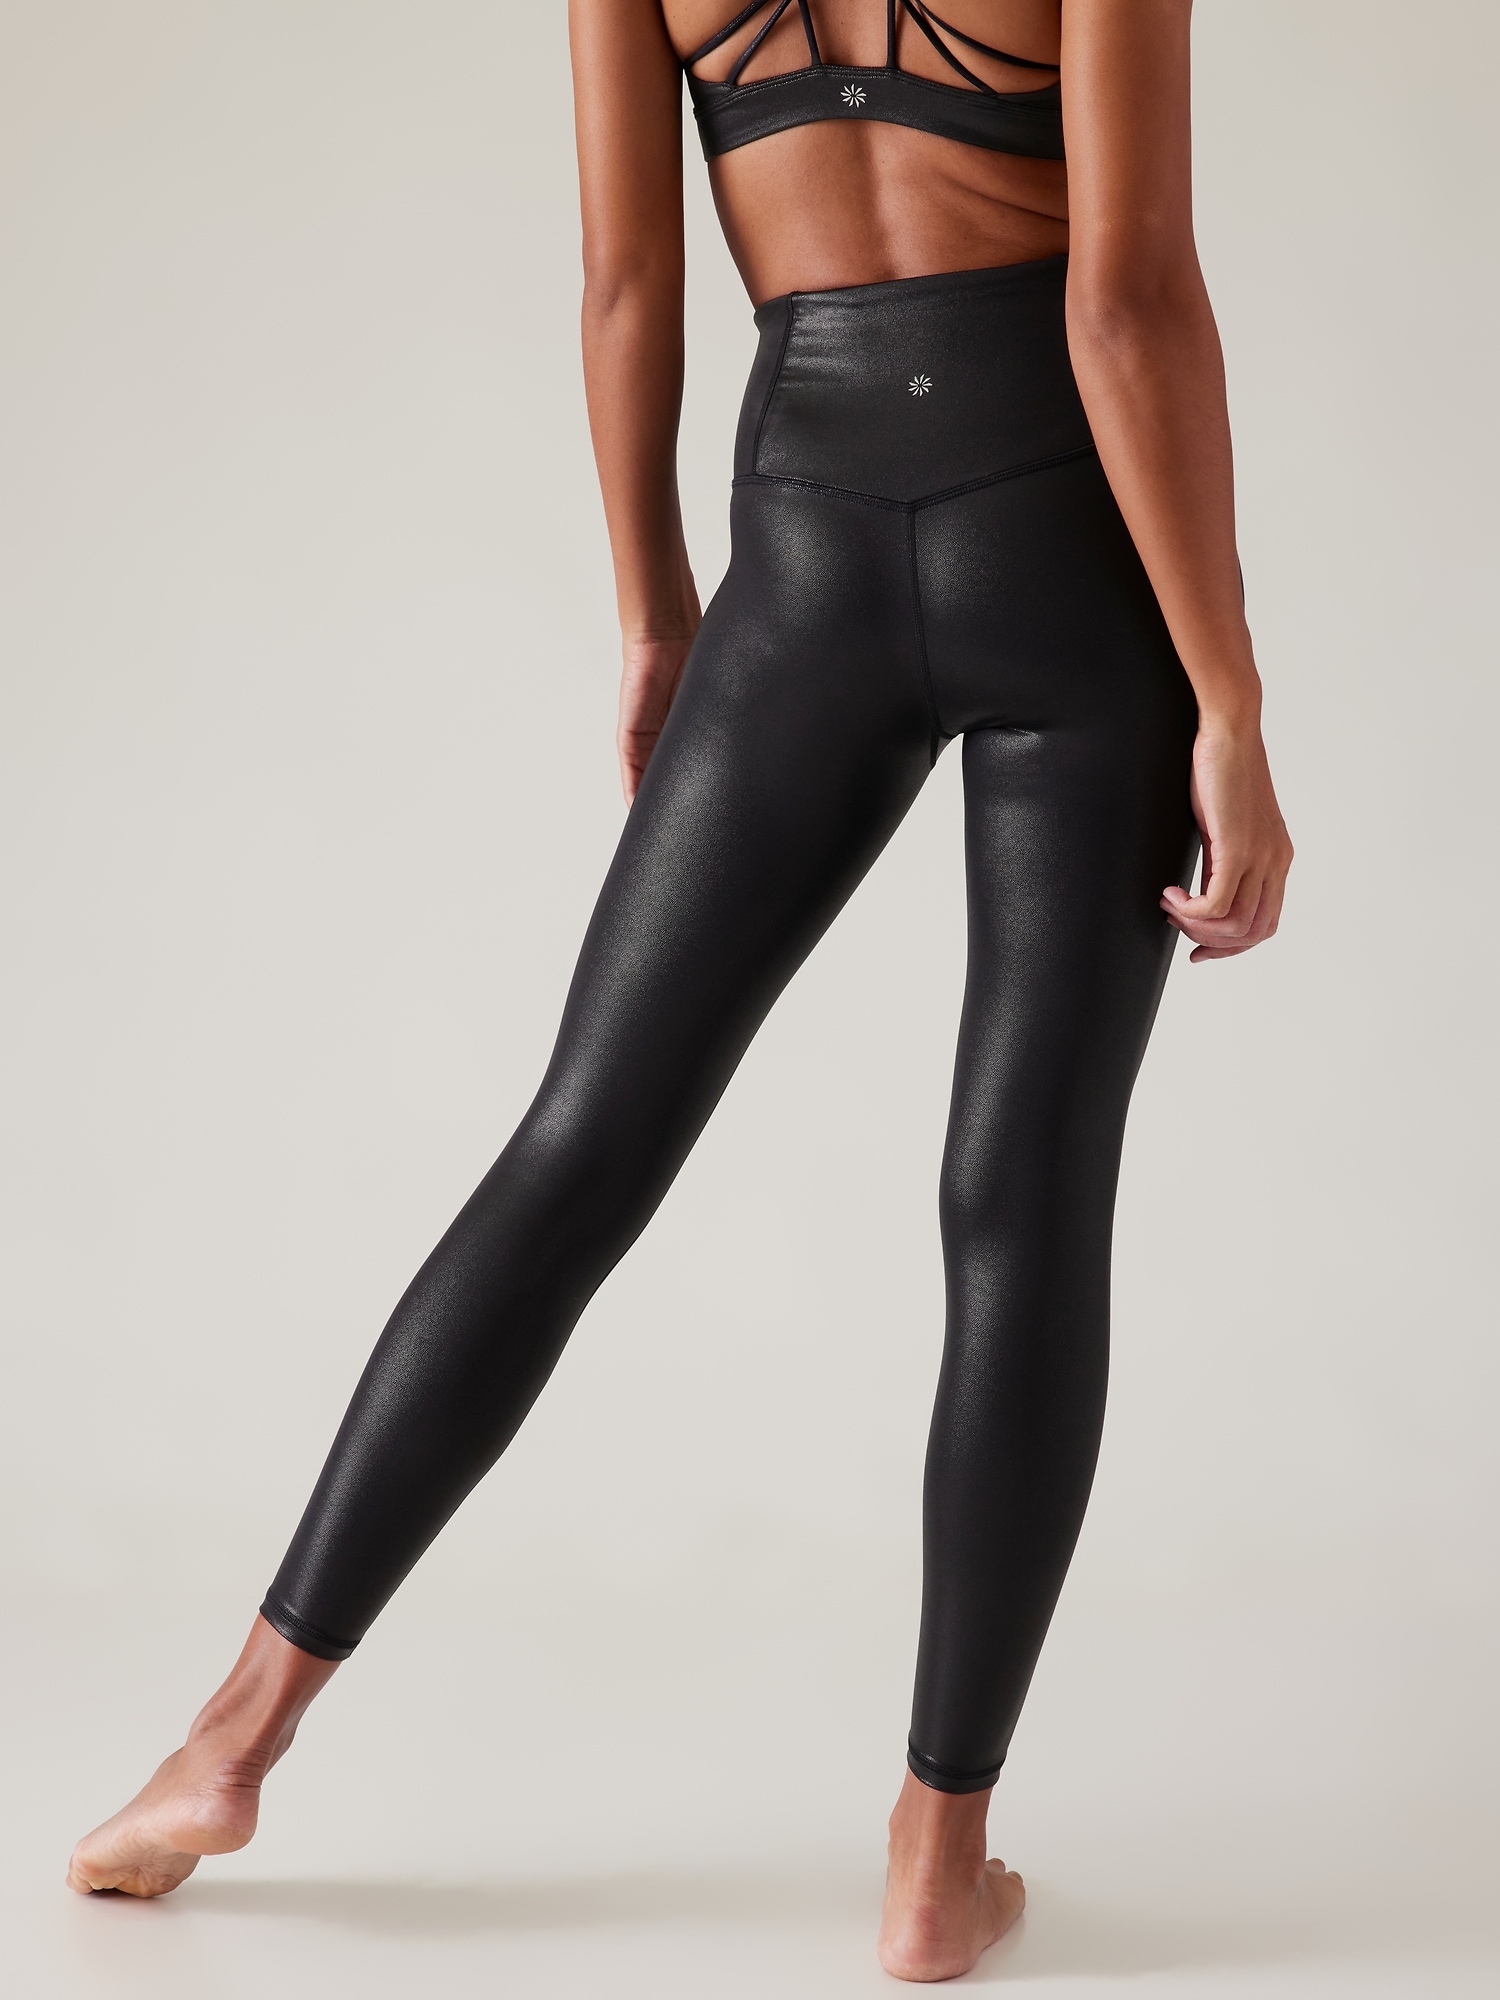 Athleta Elation Shine Tight in Black Workout Shimmer Size M - $43 - From  Katie